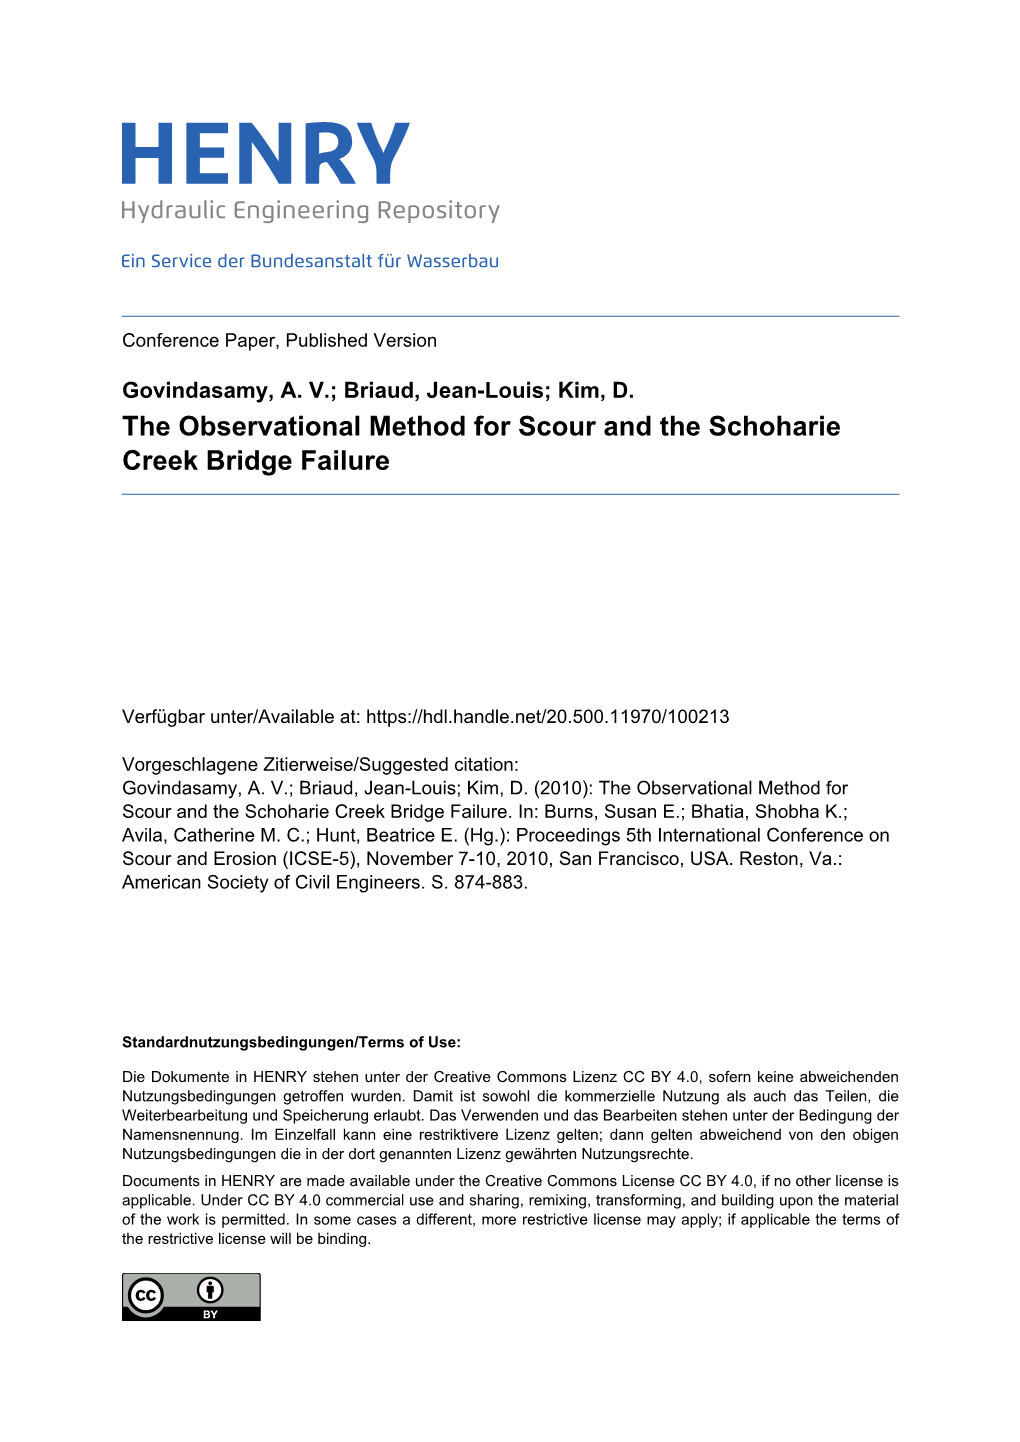 The Observational Method for Scour and the Schoharie Creek Bridge Failure